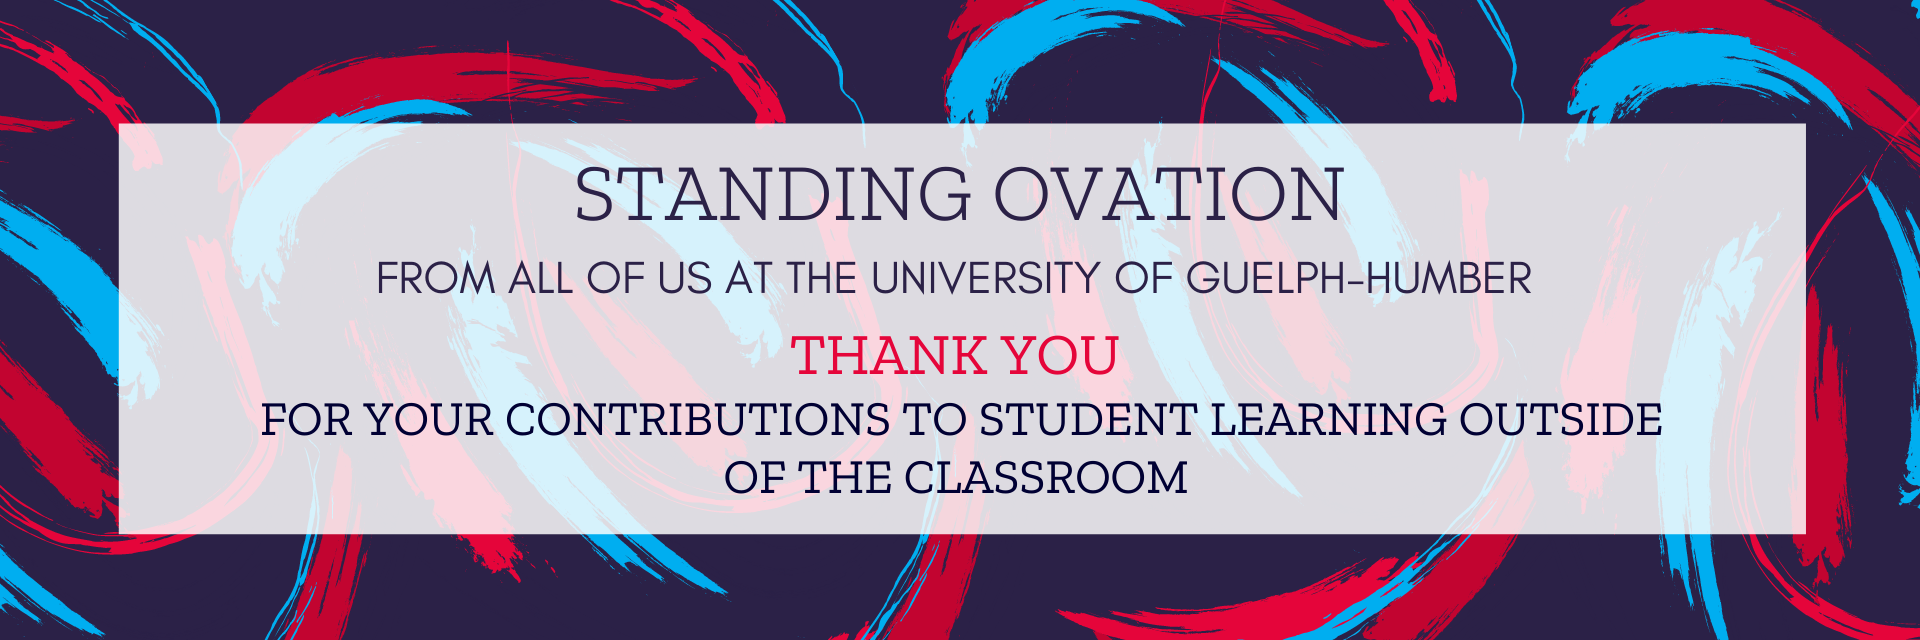 Standing Ovation - From all of us at the University of Guelph-Humber: Thank you for your contributions to student learning outside of the classroom